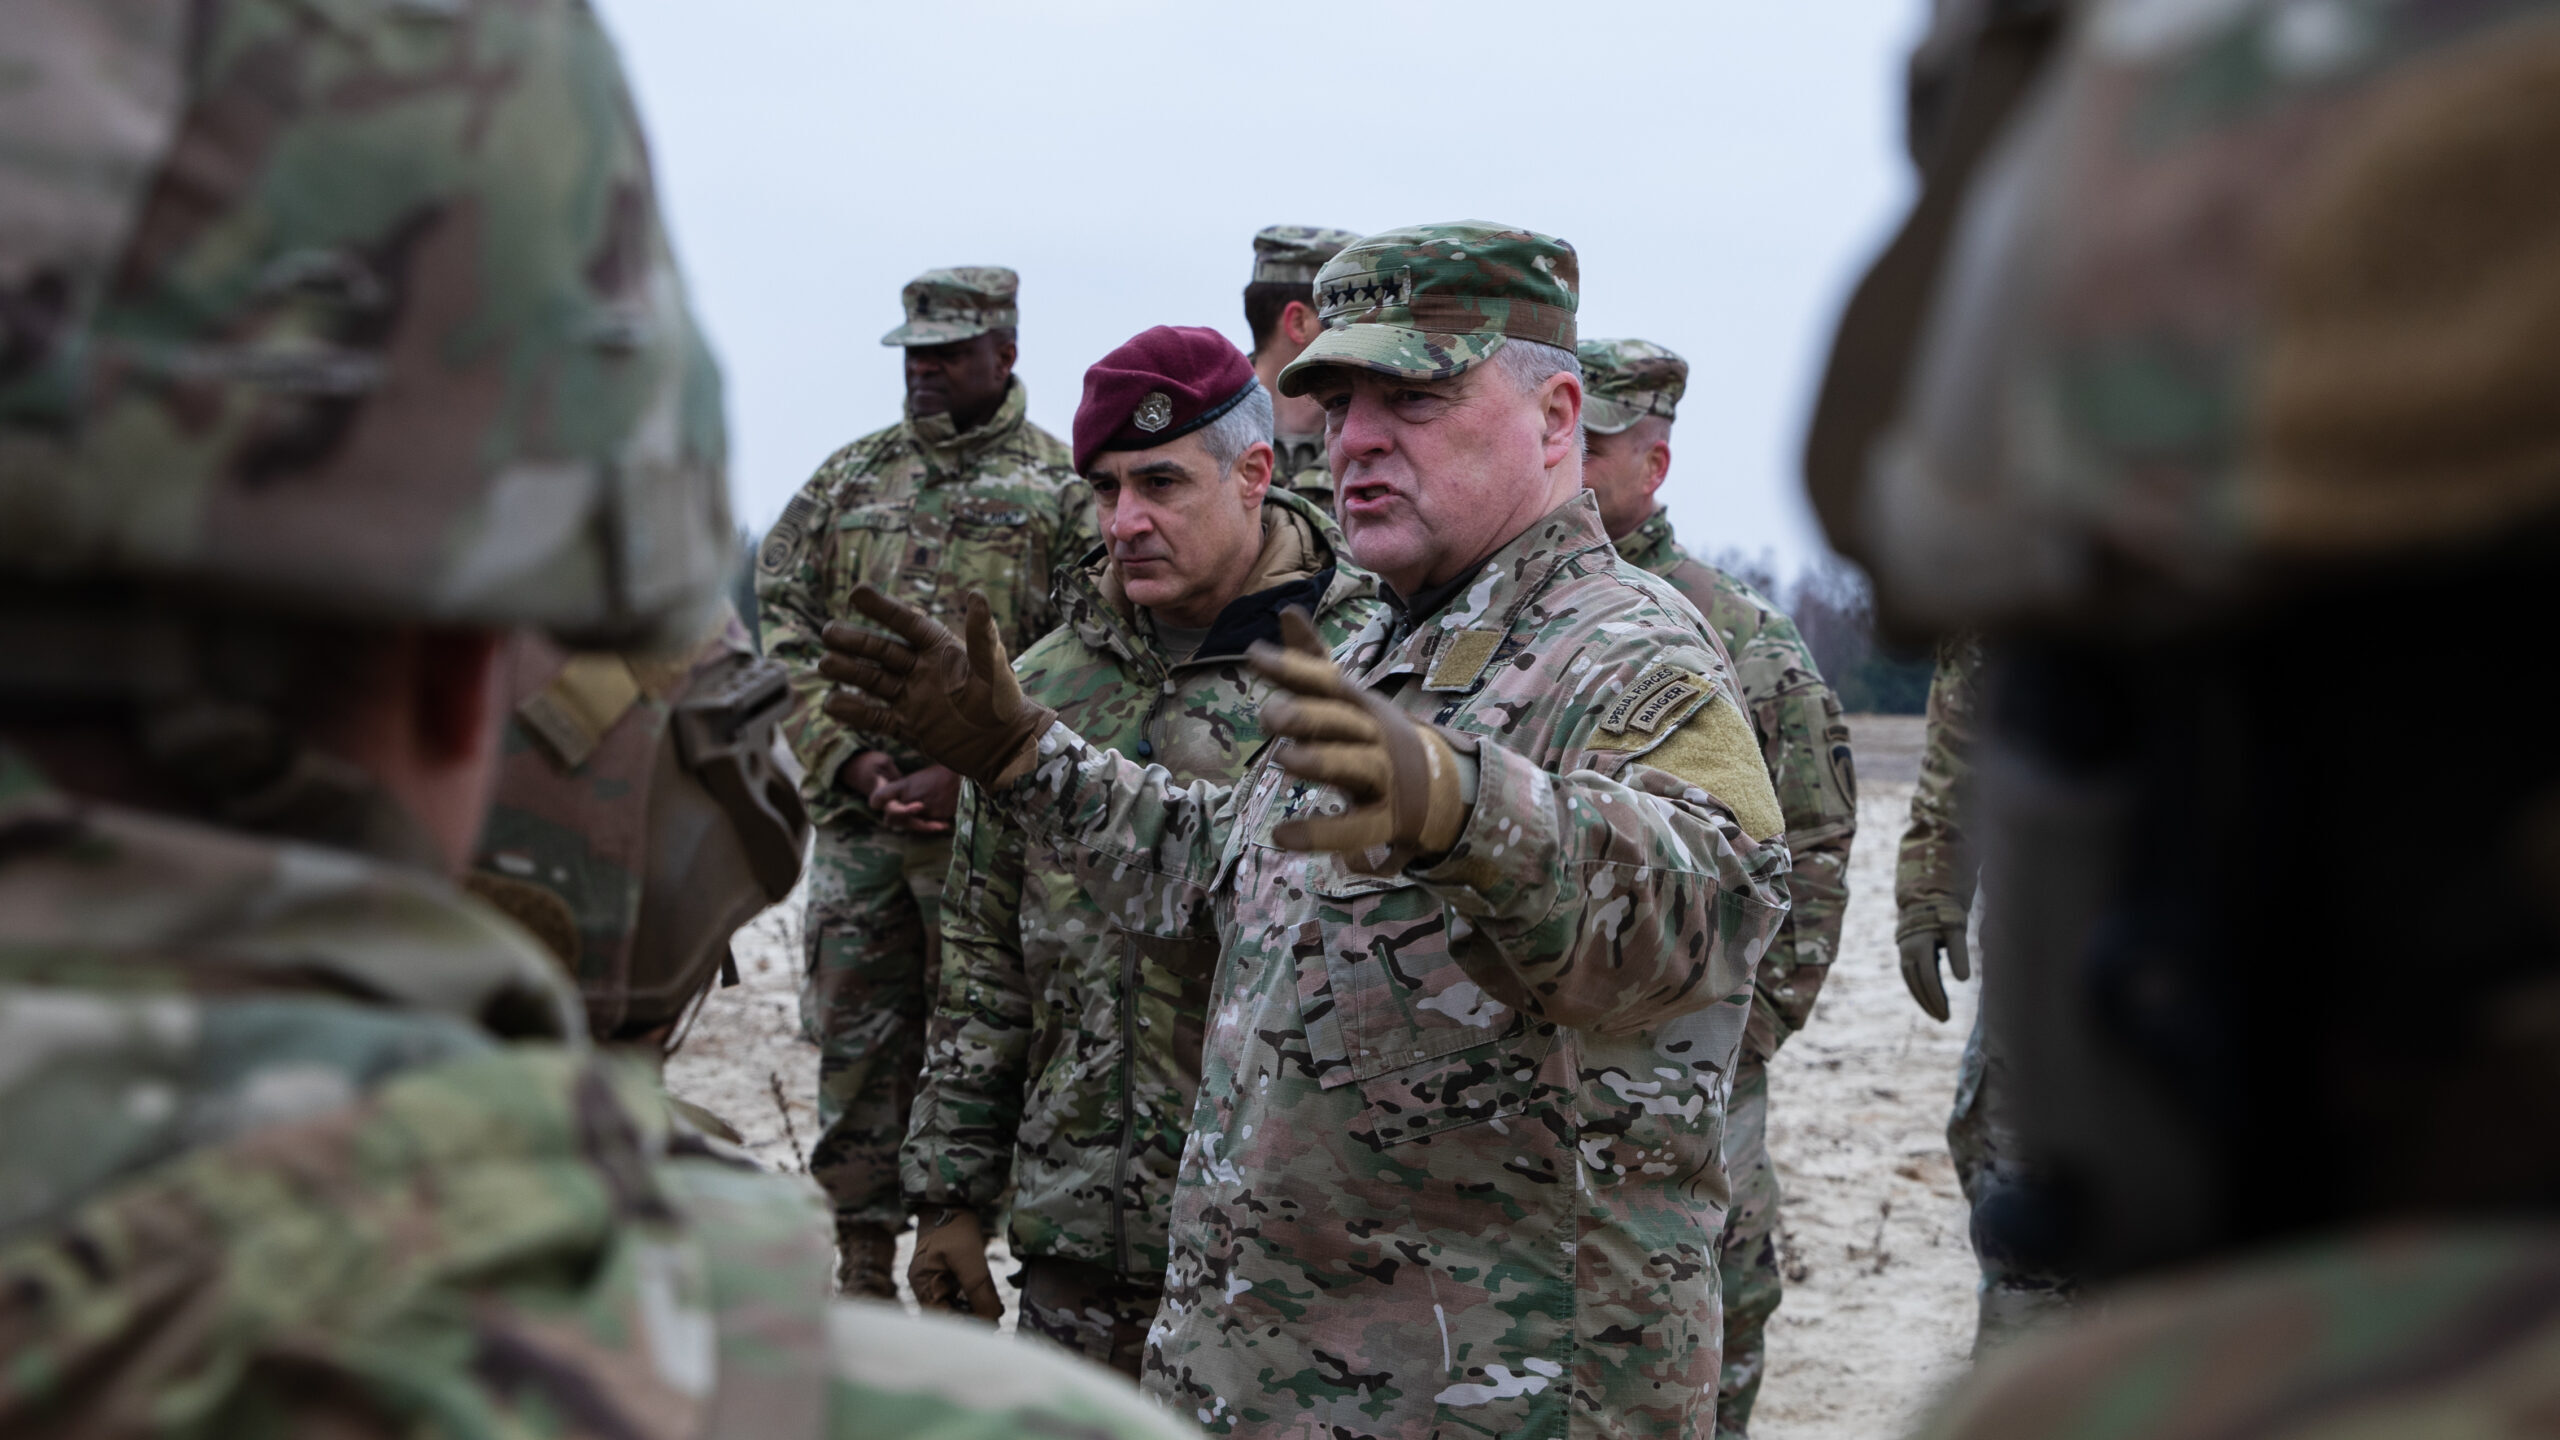 CJCS visits 82nd Airborne Paratroopers in Poland